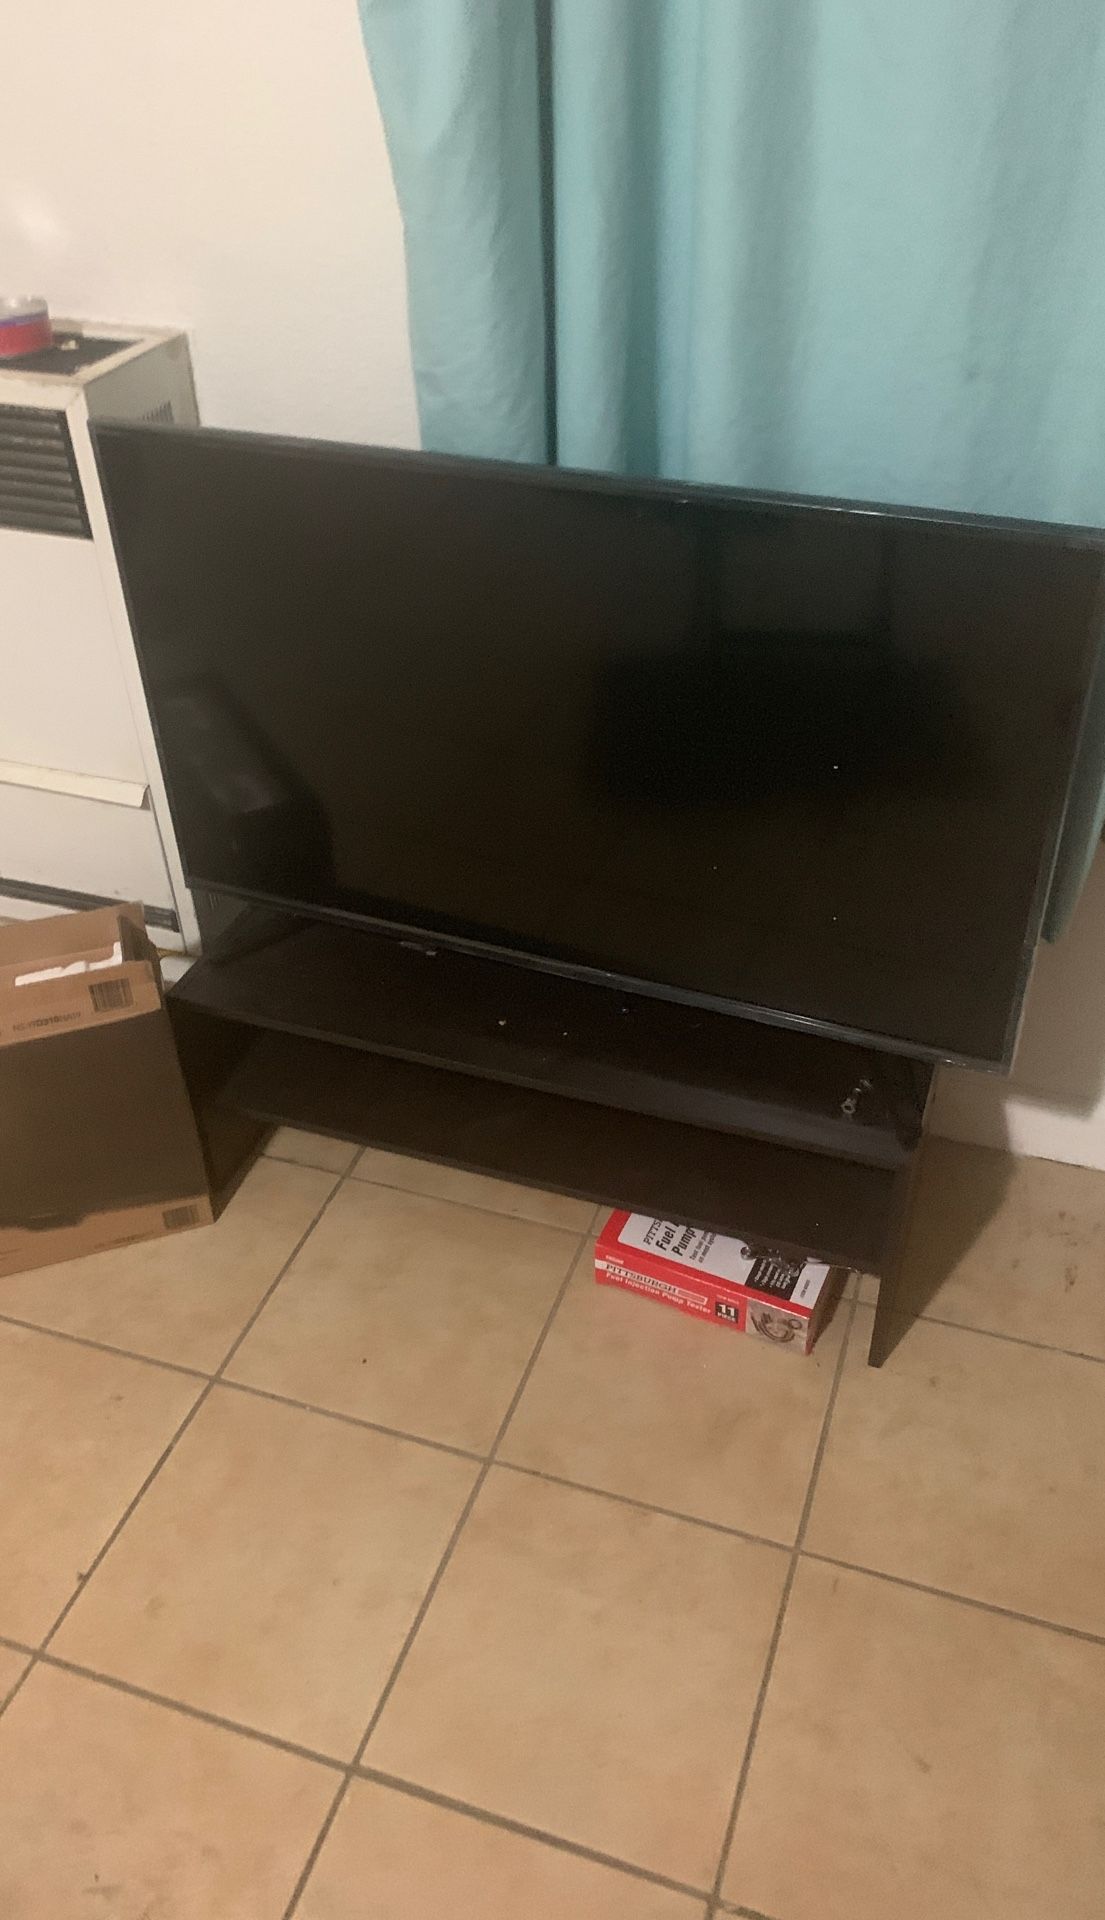 2 almost new TVs insignia 42” $100 & 19” $50